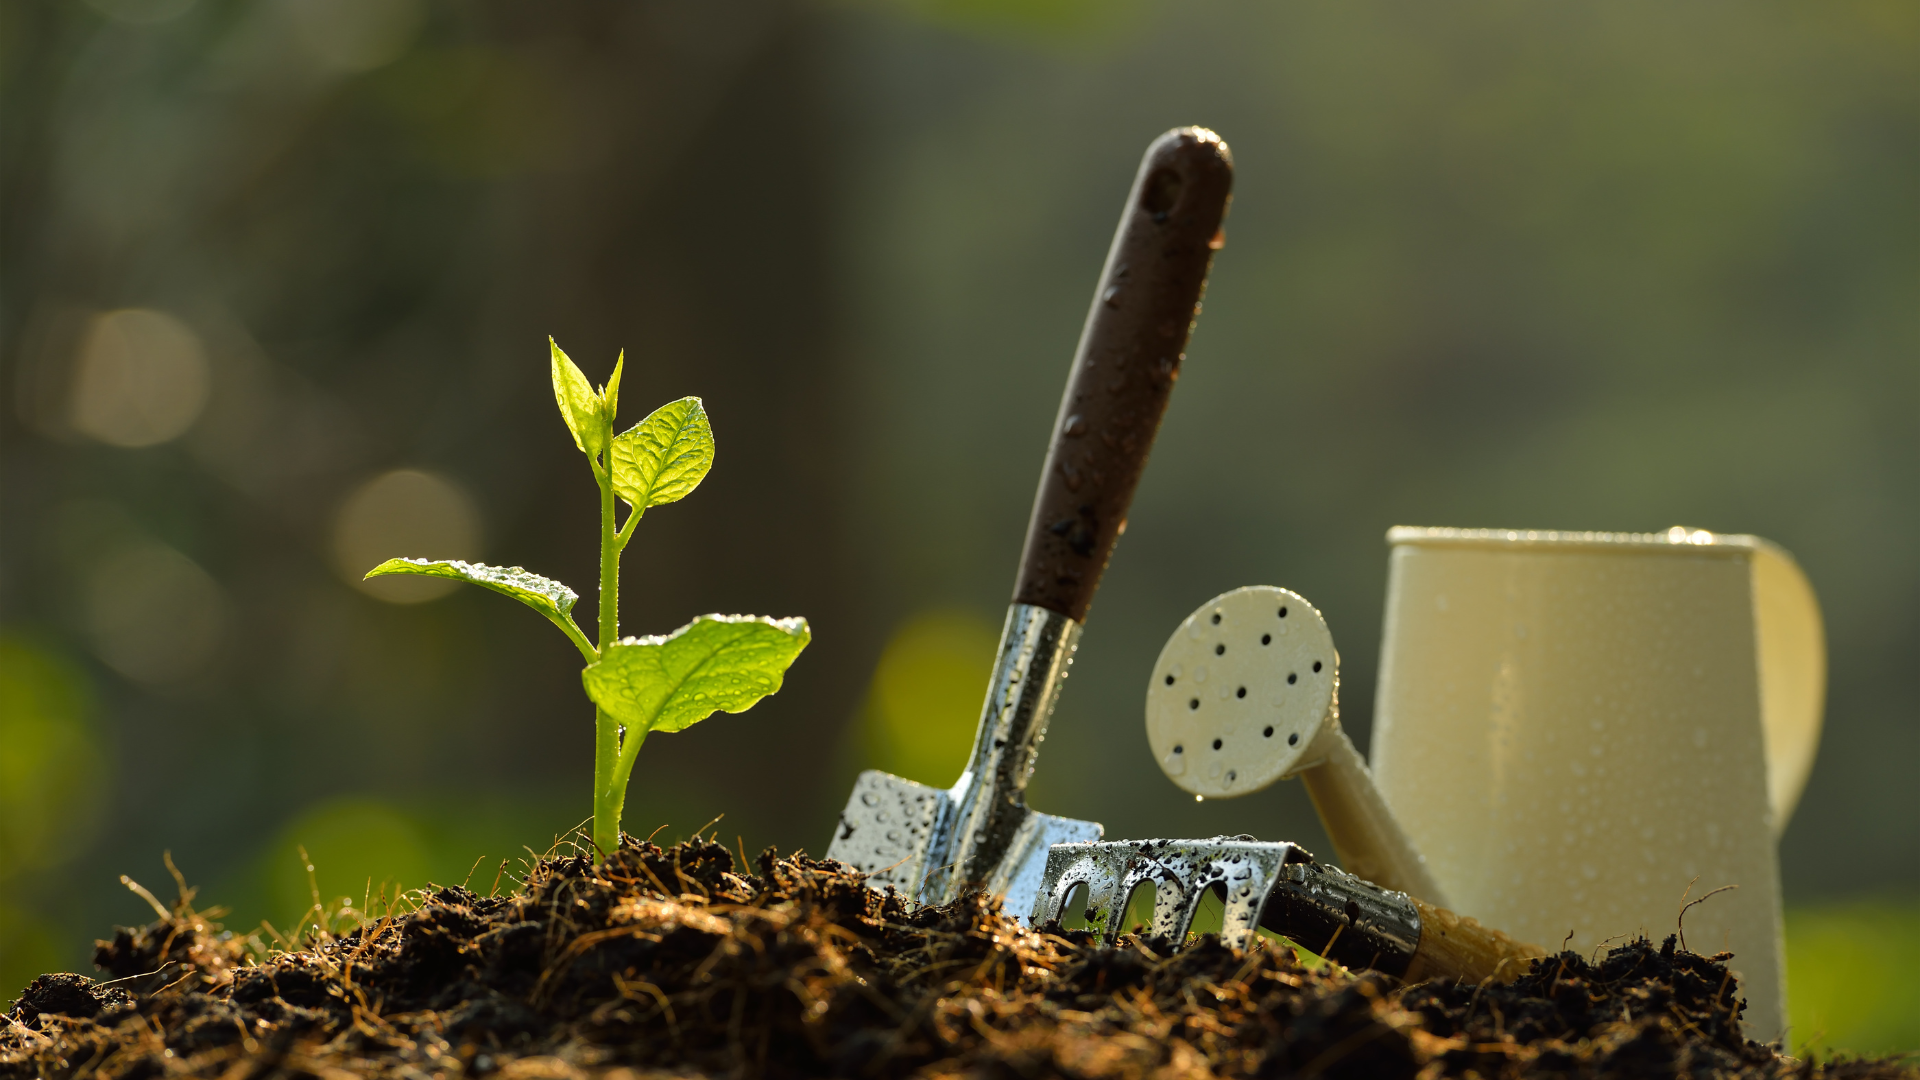 Image of the beginning s of a garden with a plant, shovel and pot.